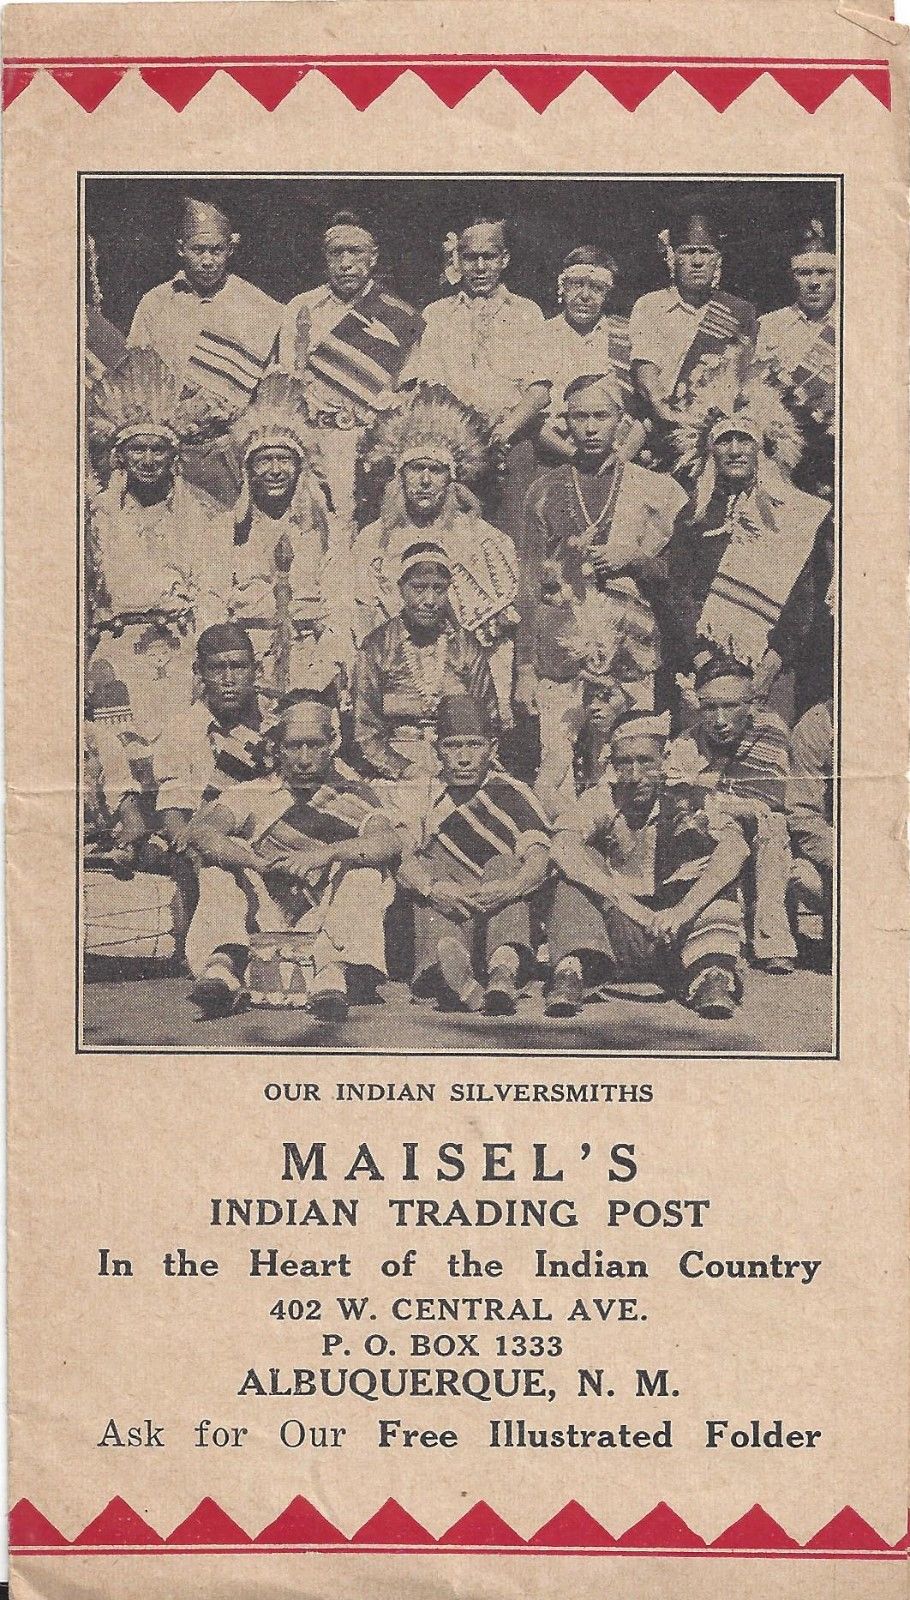 Maisel's Indian Trading Post